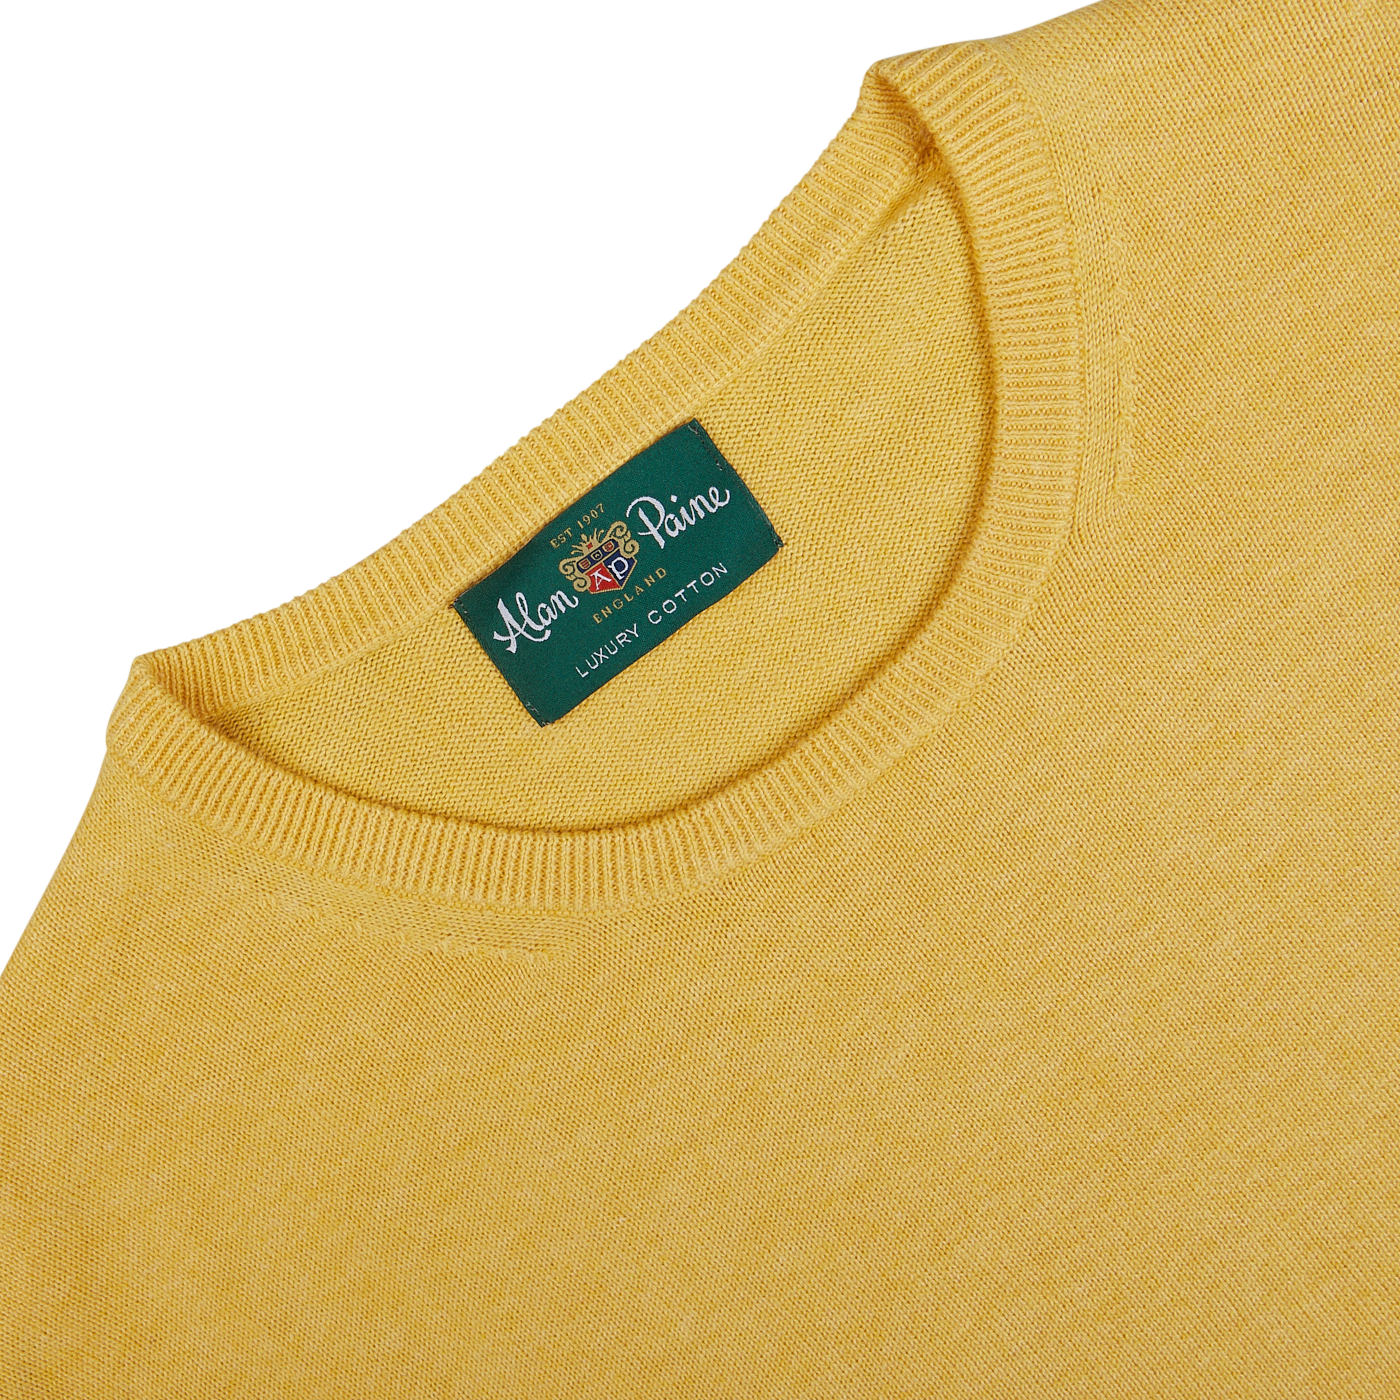 Corn Yellow Luxury Cotton Crewneck sweater with a clothing label that reads "Alan Paine, luxury cotton cashmere.